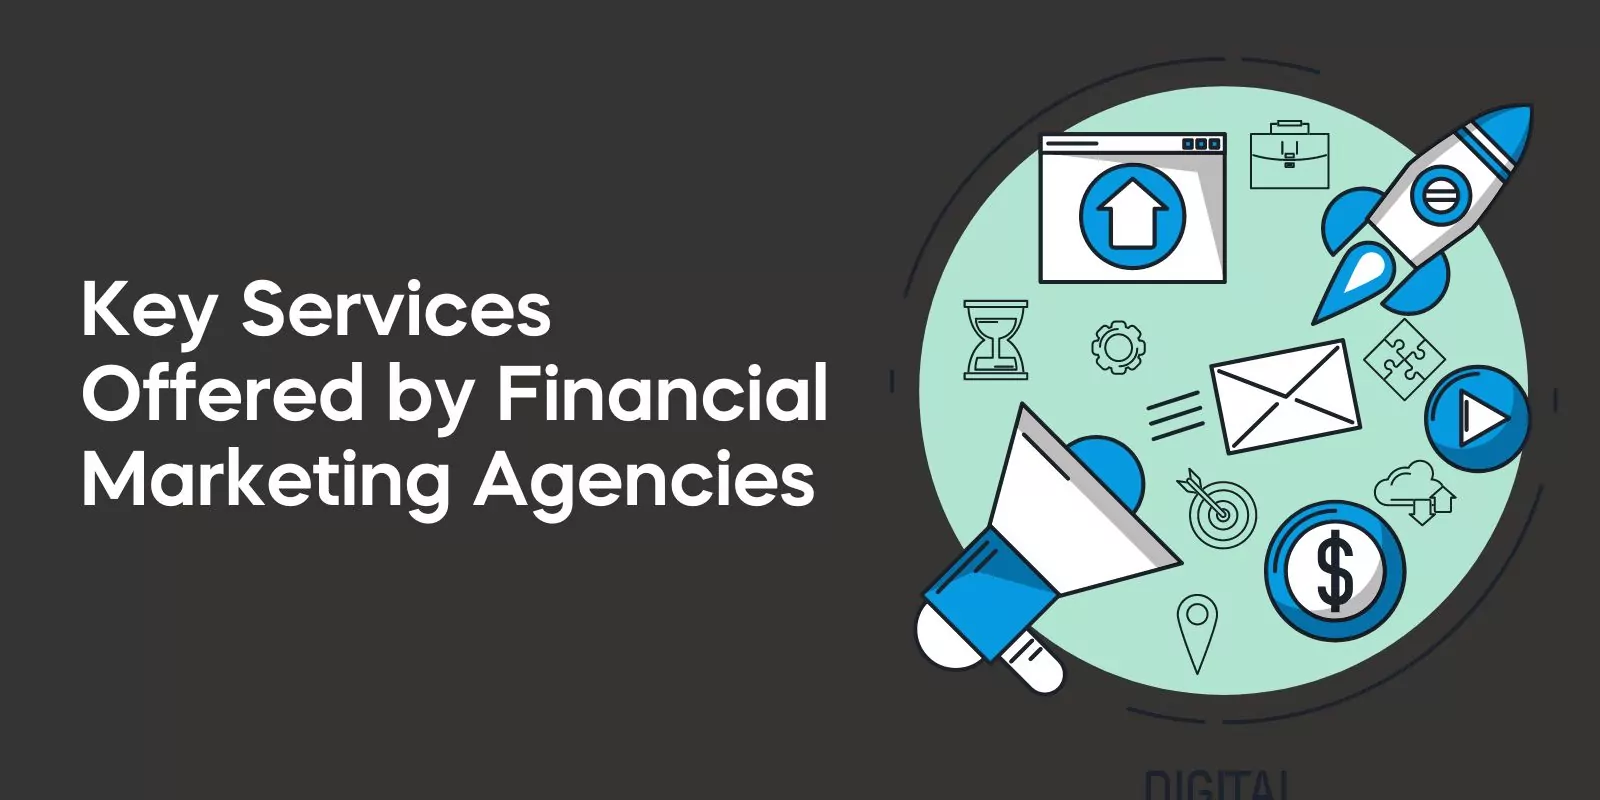 Key Services Offered by Financial Marketing Agencies